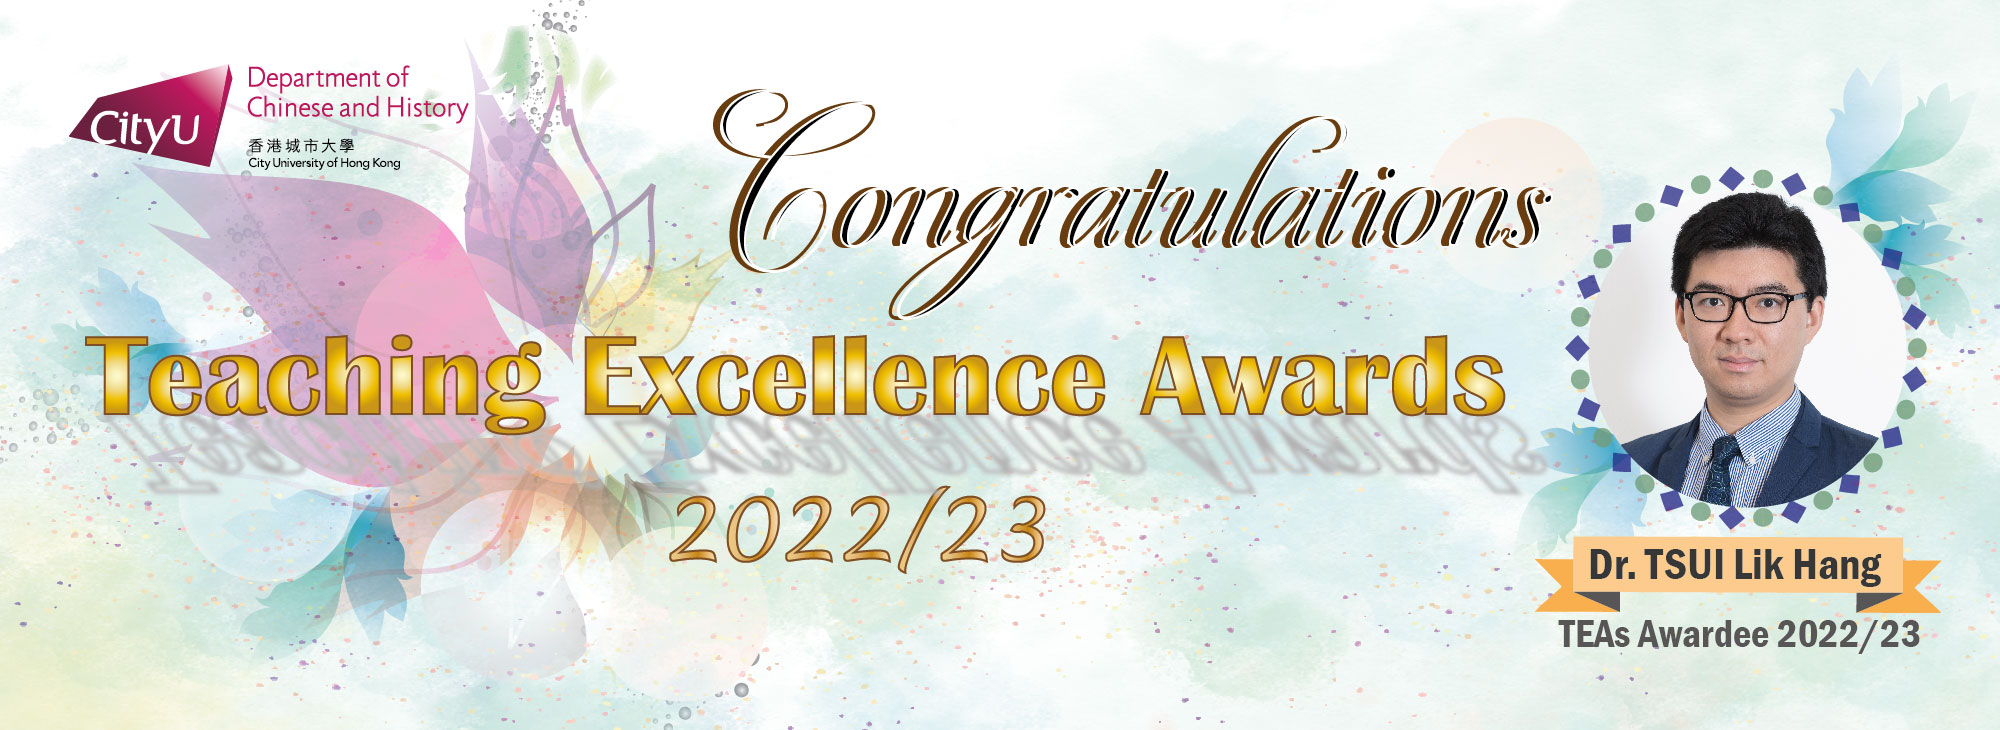 Congratulations to Dr. TSUI Lik Hang for receiving the Teaching Excellence Awards 2022/23